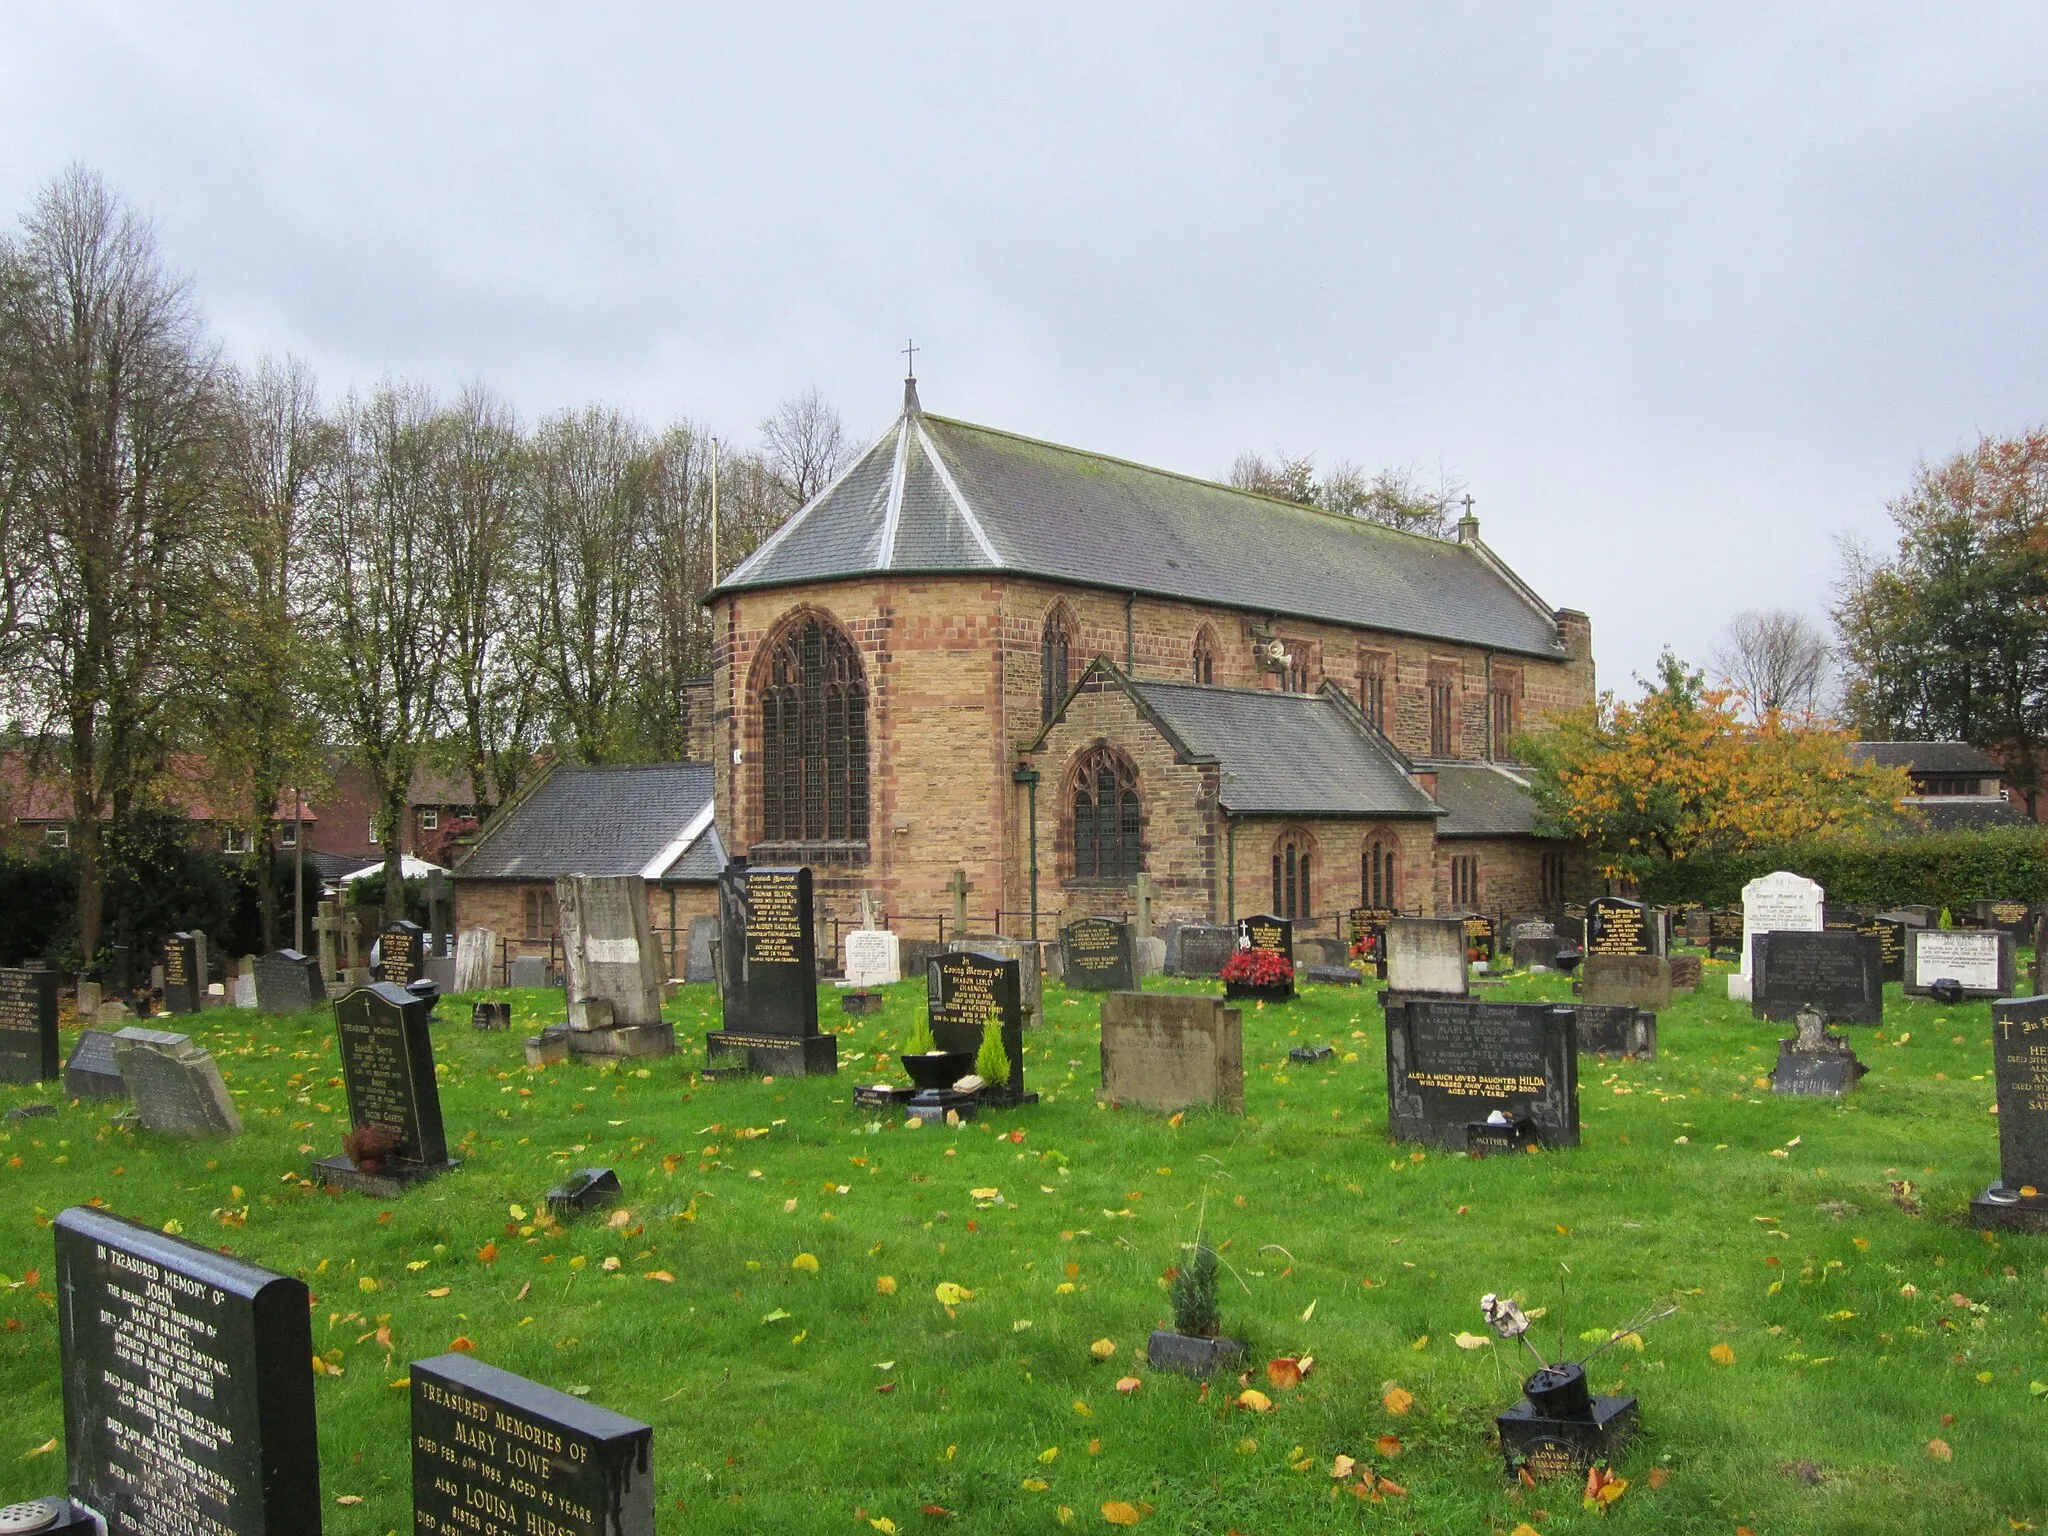 Photo showing: Photo taken at St Luke's Church, Orrell, Greater Manchester, England.